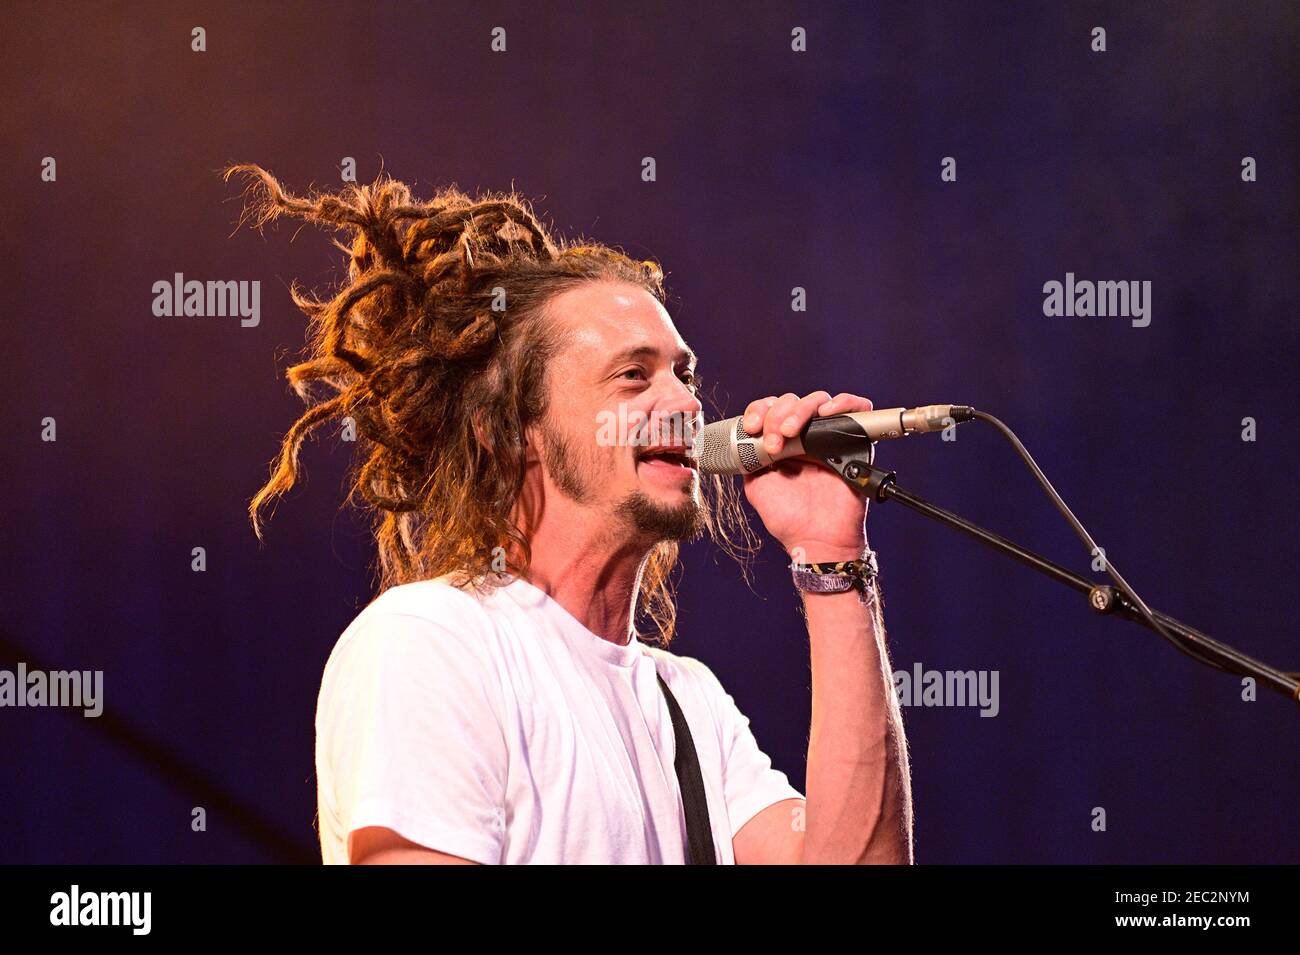 Vienna, Austria. August 15, 2015. Impressions from the 2015 festival season on the Danube Island in Vienna. Concert with Jacob Hemphill from Soja. Stock Photo